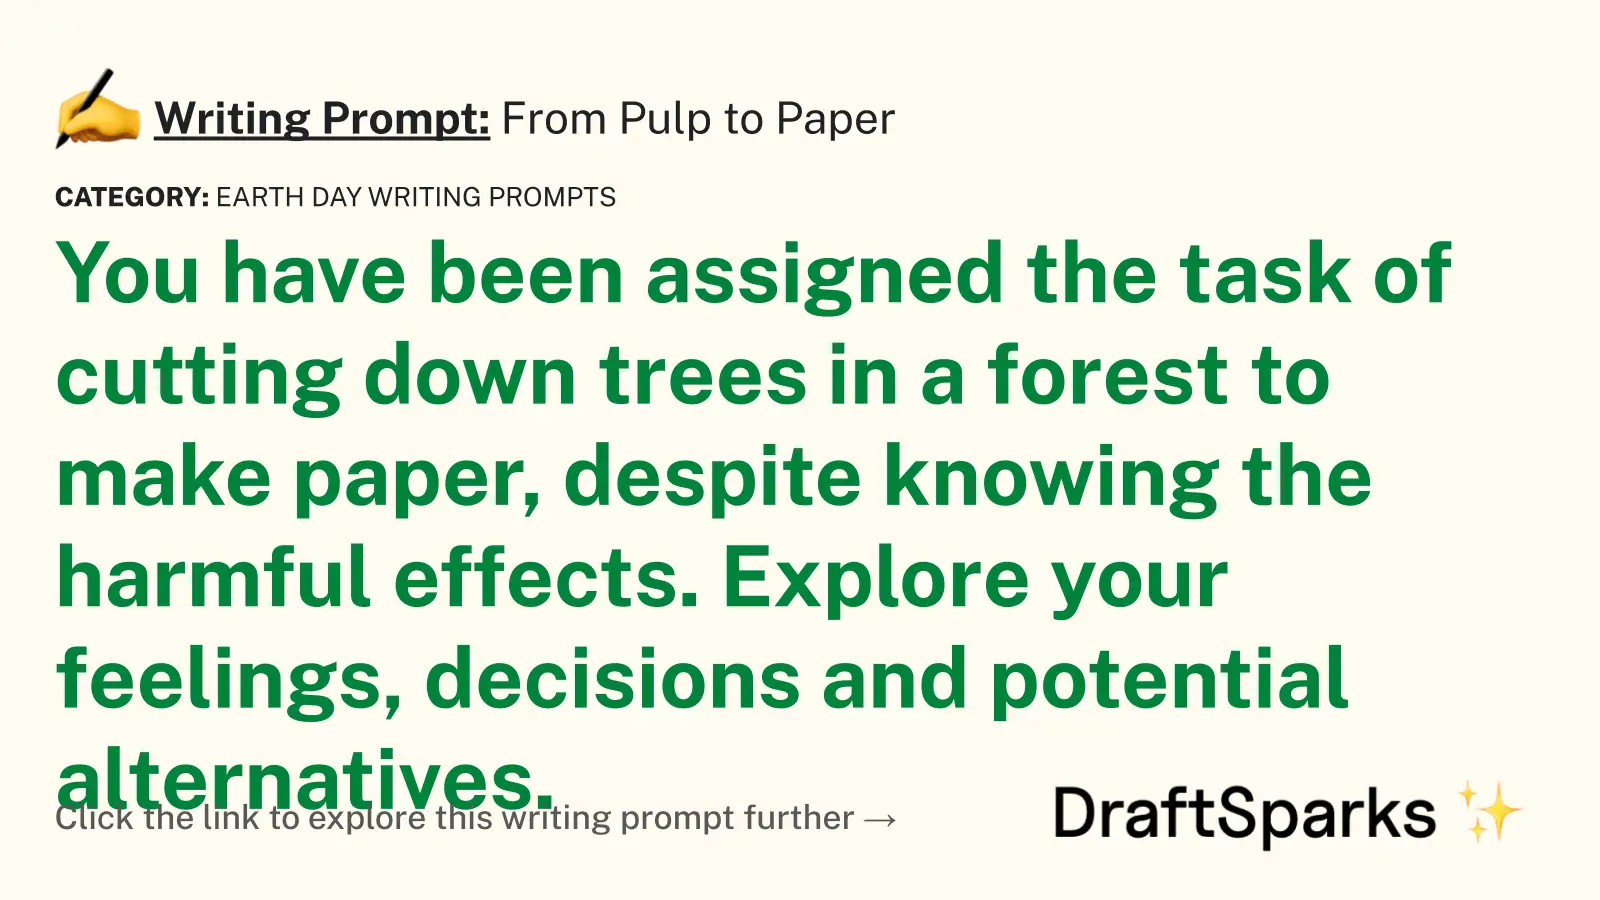 From Pulp to Paper